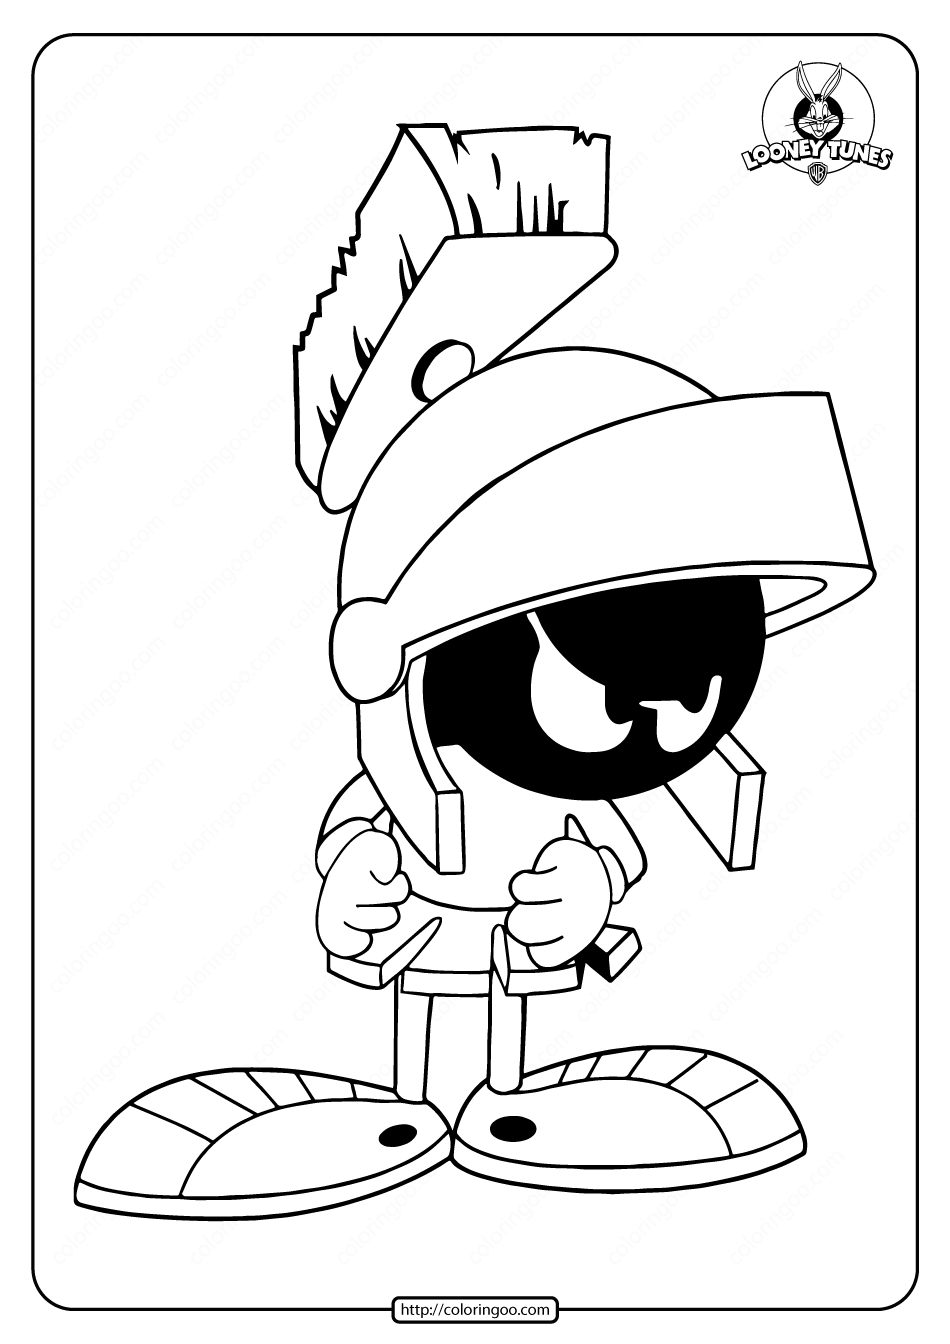 looney tunes marvin the martian coloring page